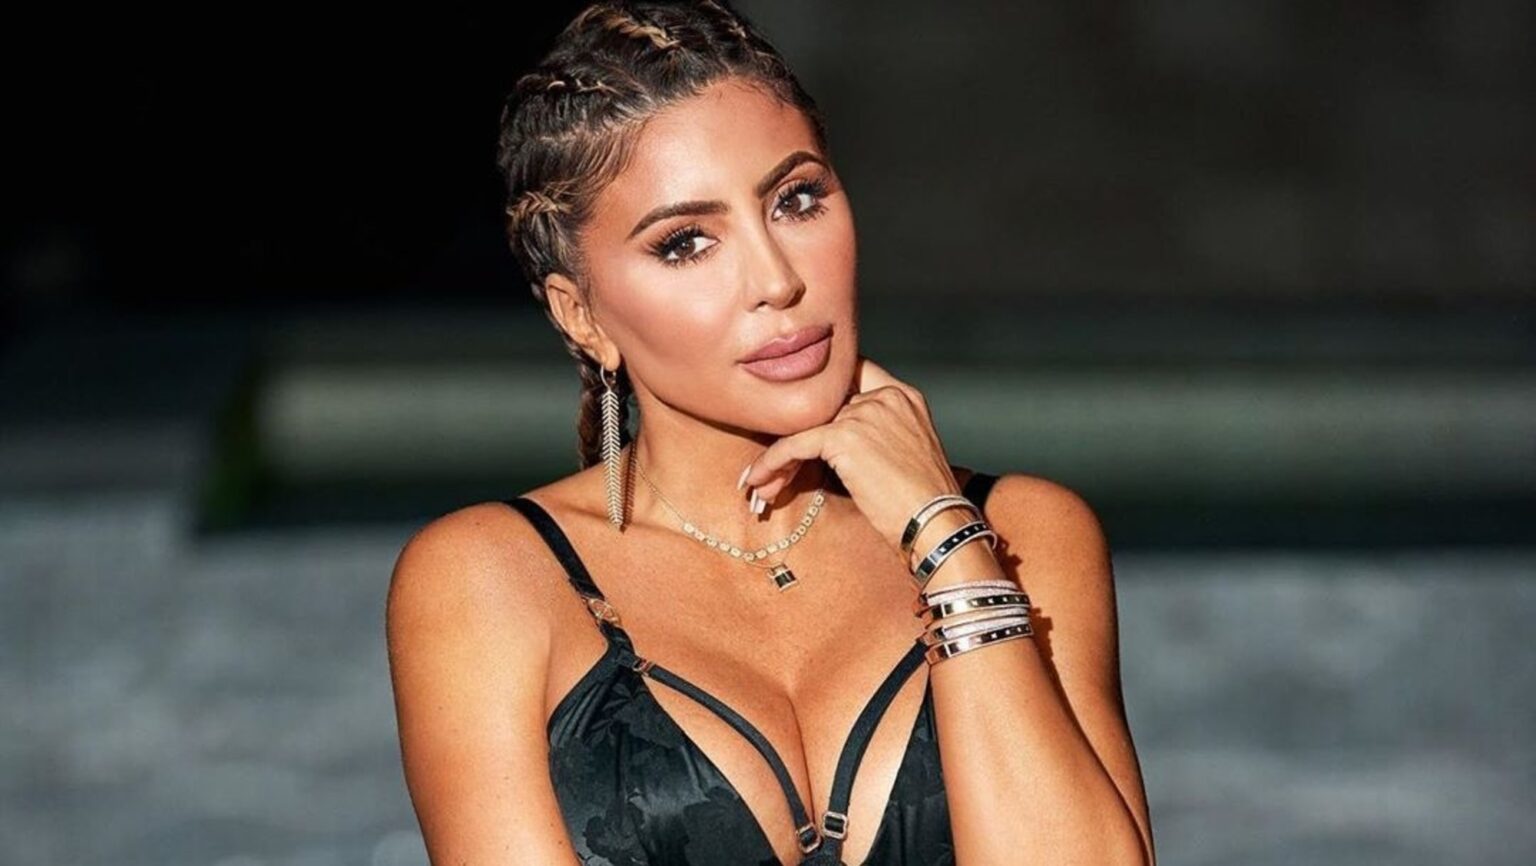 Larsa Pippen was caught holding hands with Minnesota Timberwolves star Malik Beasley. Could he be her new beau? What’s in store for their future?